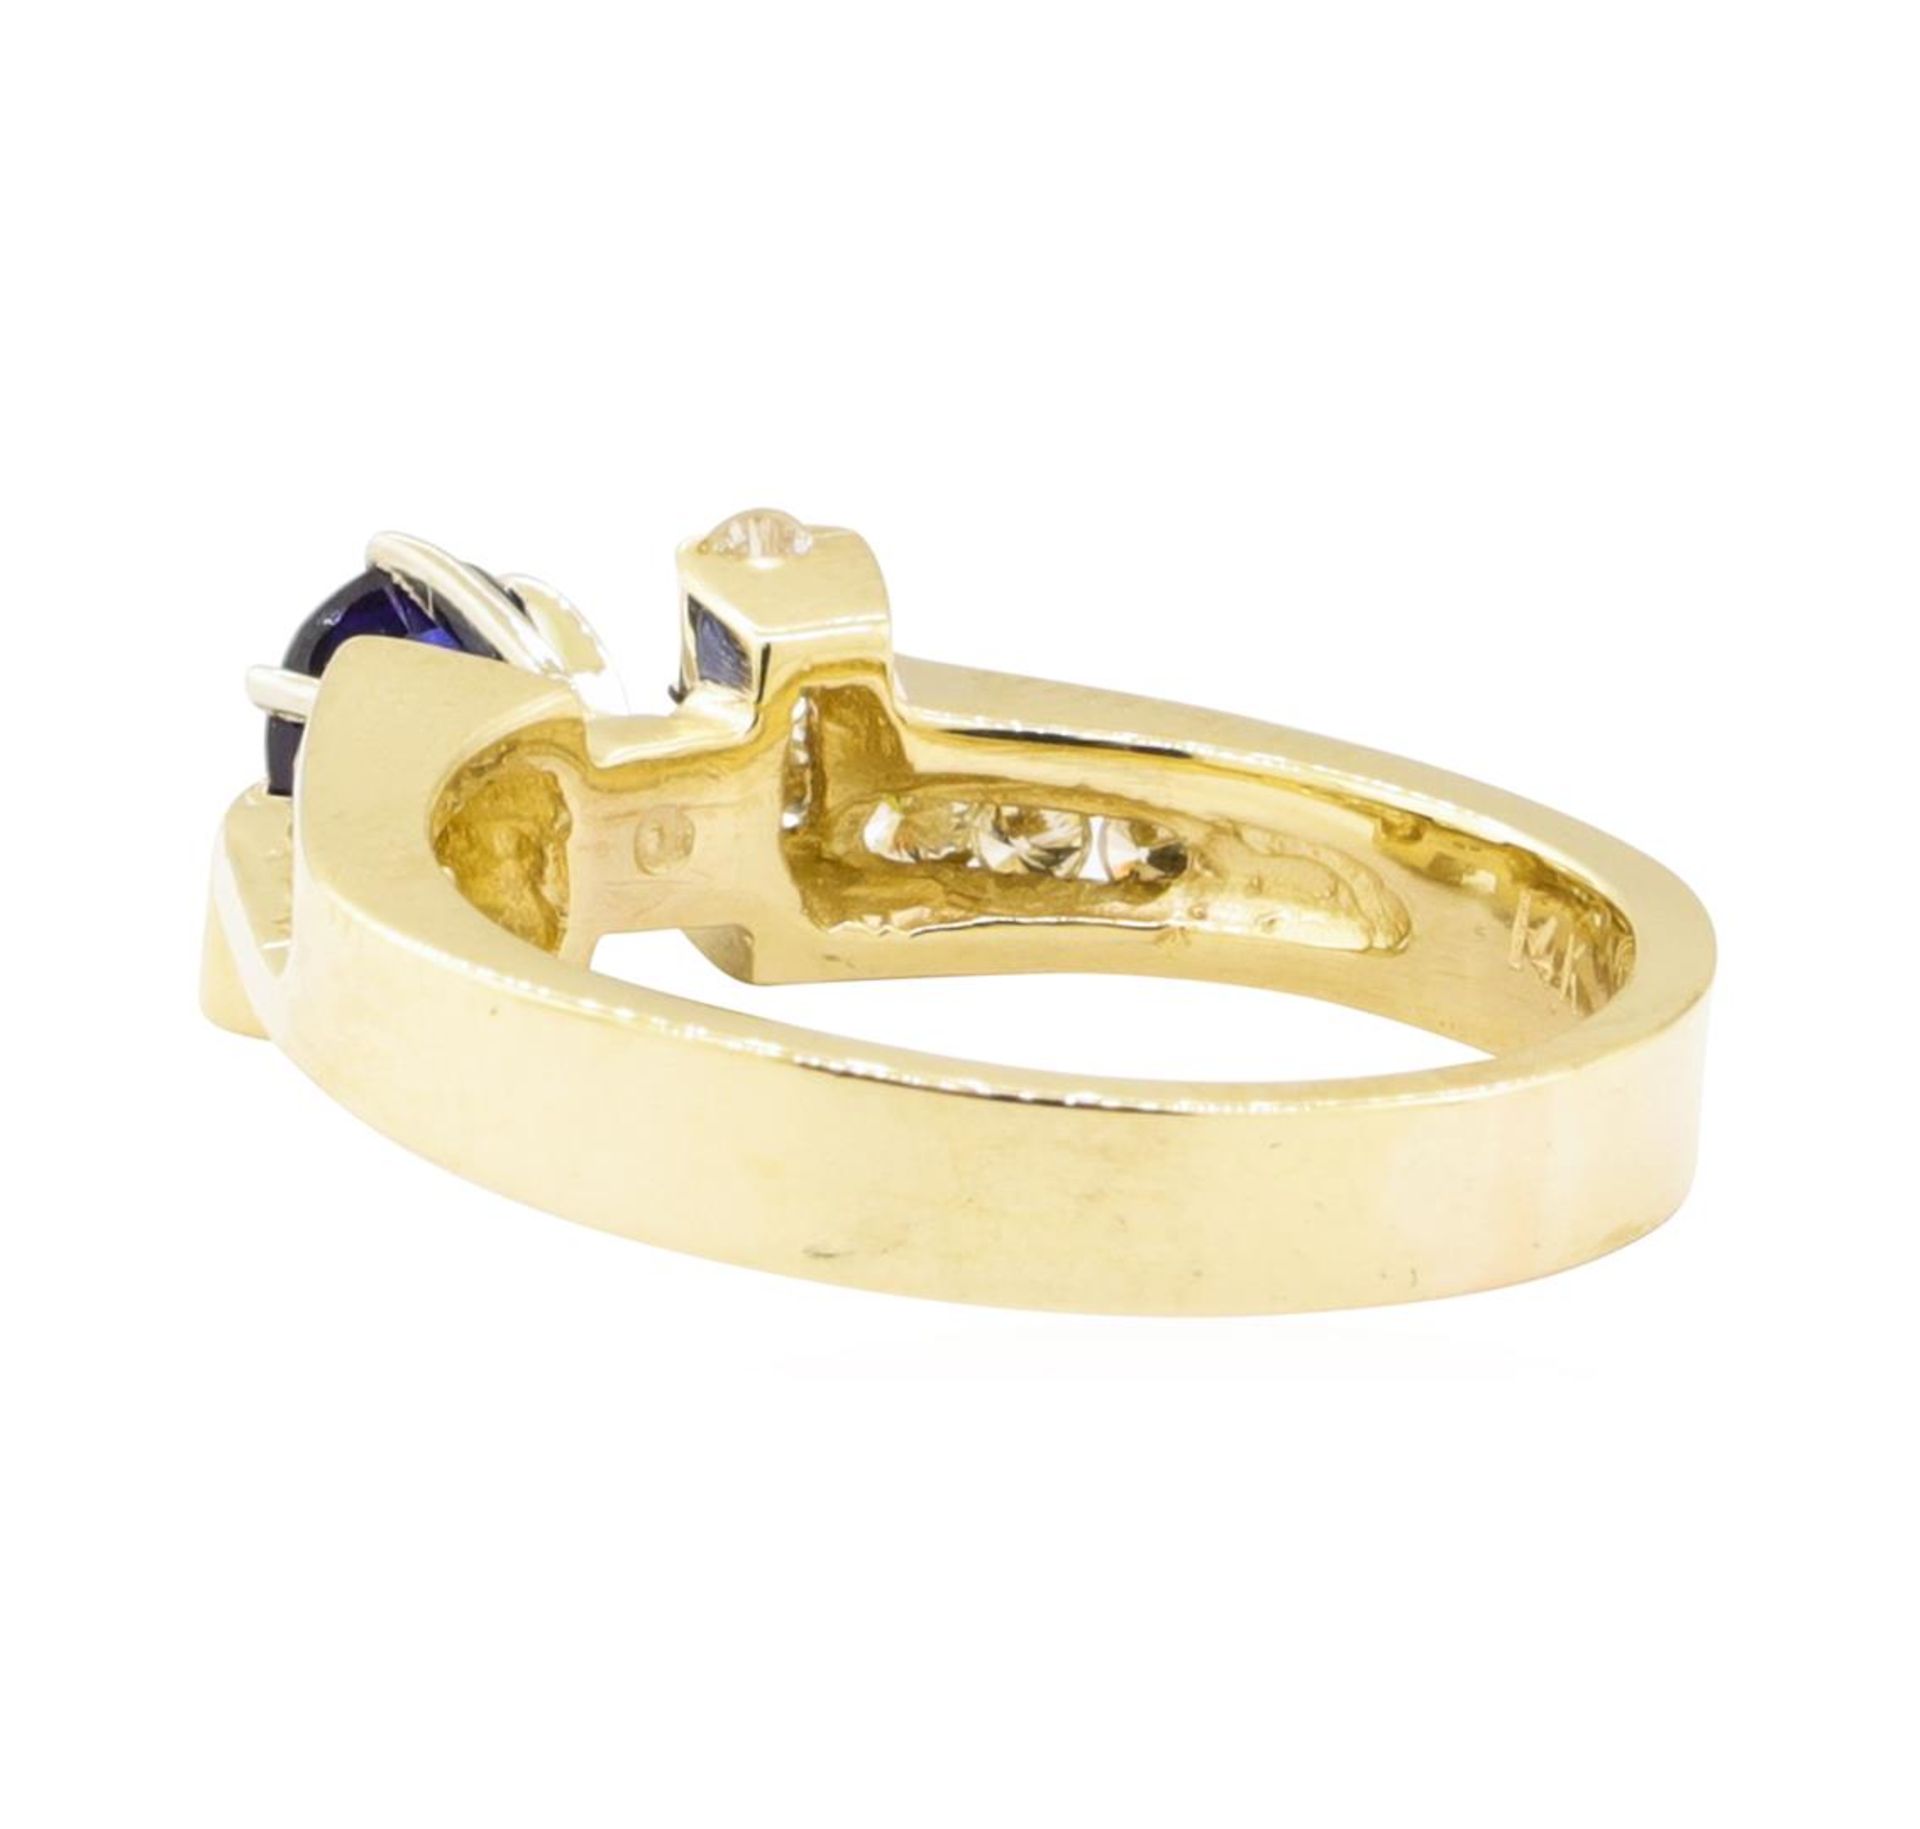 1.00 ctw Blue Sapphire and Diamond Ring - 14KT Yellow Gold - Image 3 of 4